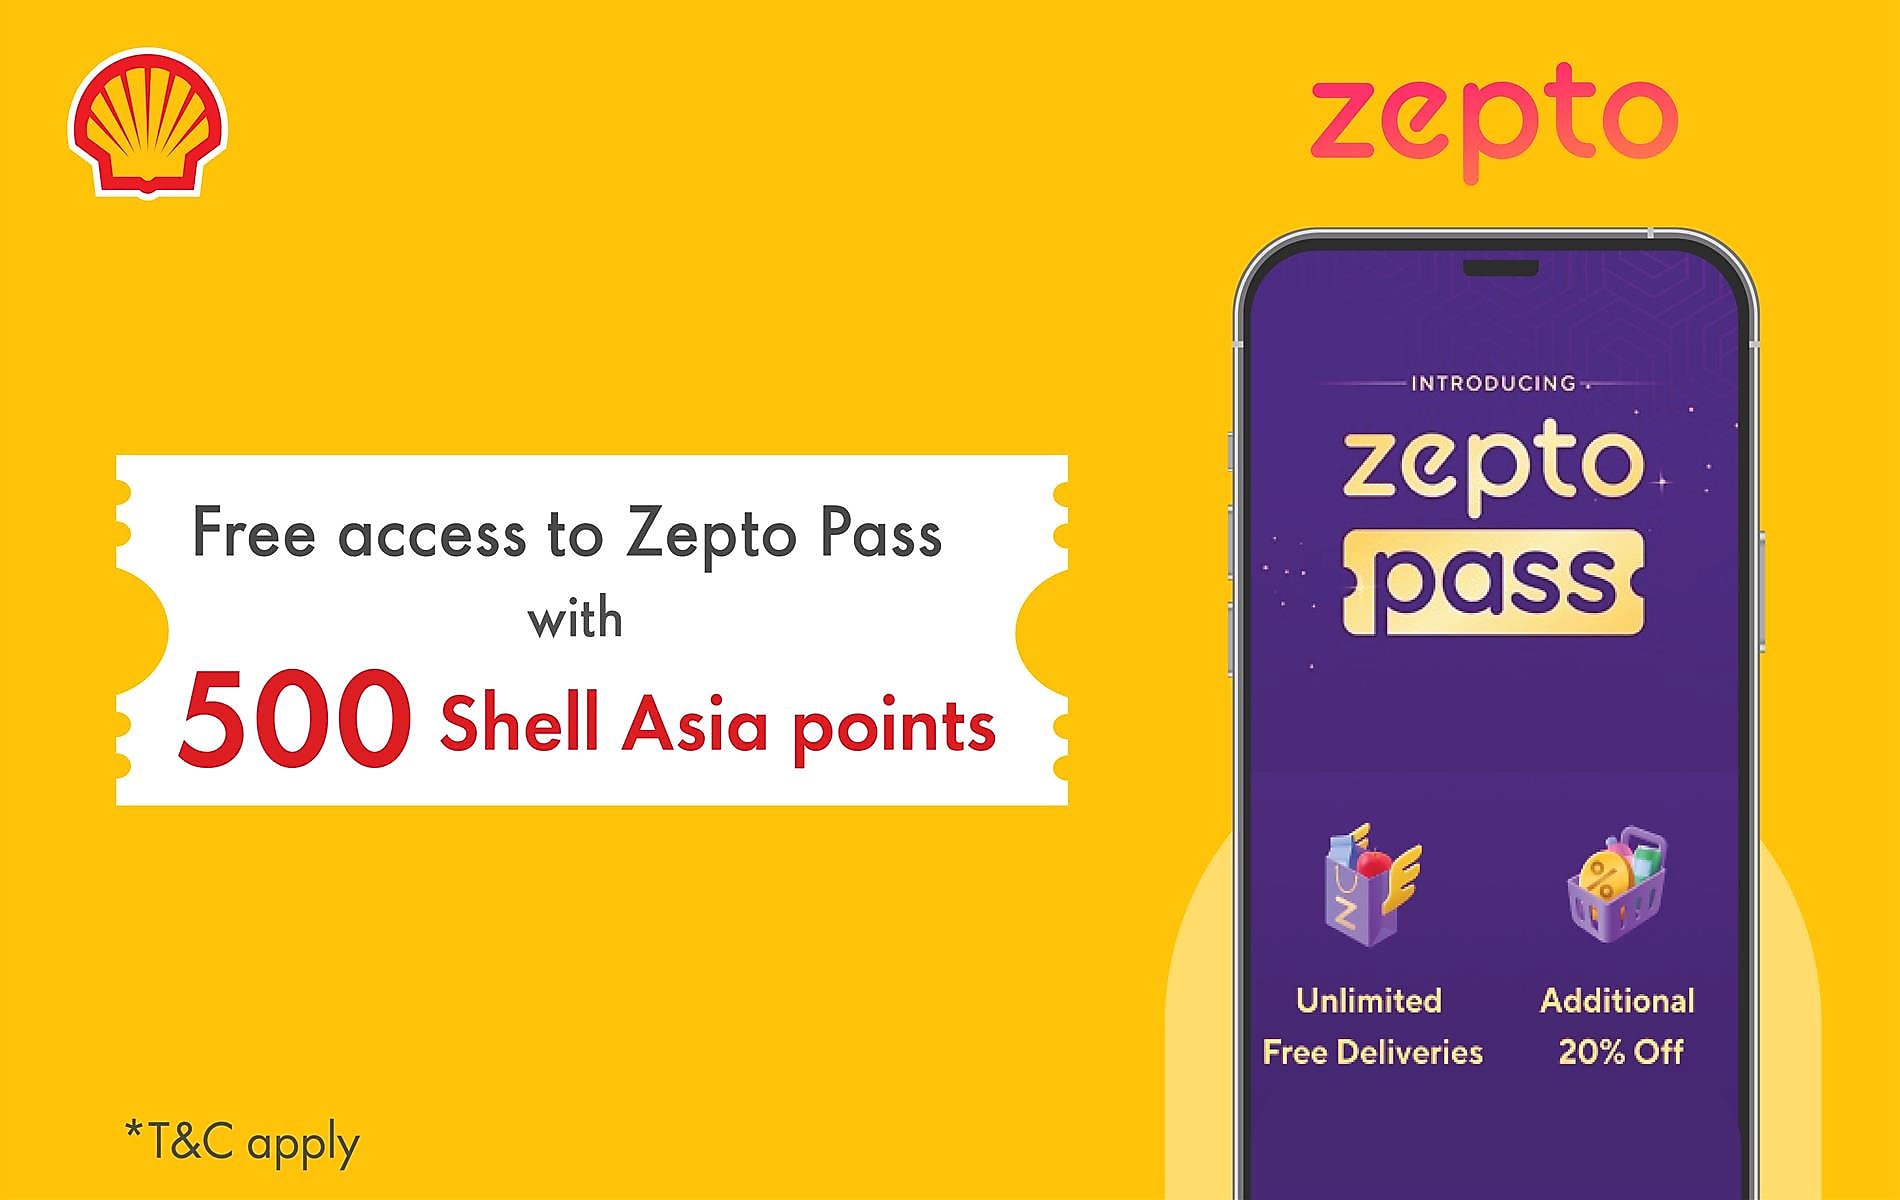 Free access to Zepto pass with 500 Points